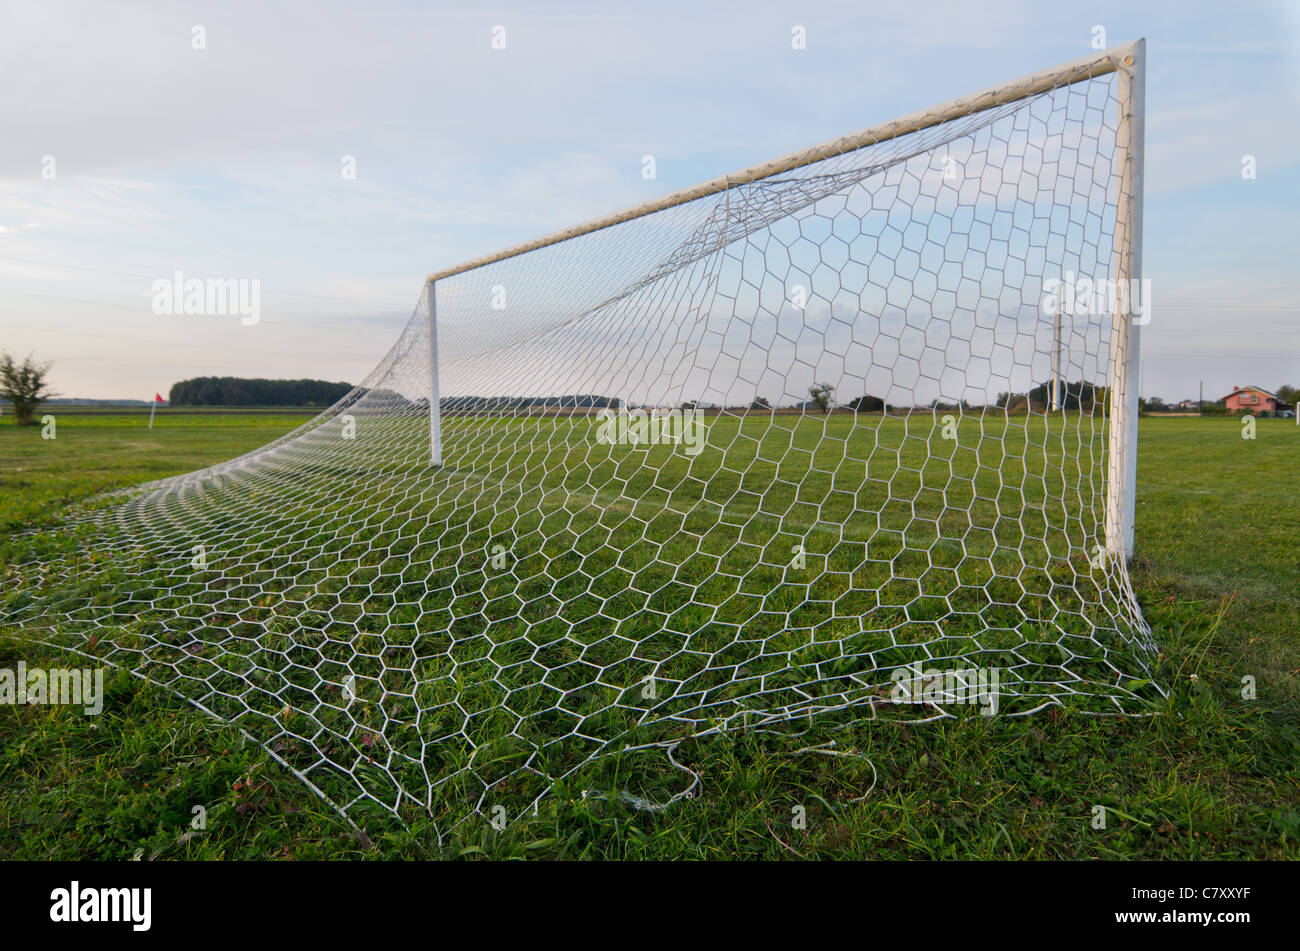 Goal shot from the corner behind wide angle Stock Photo